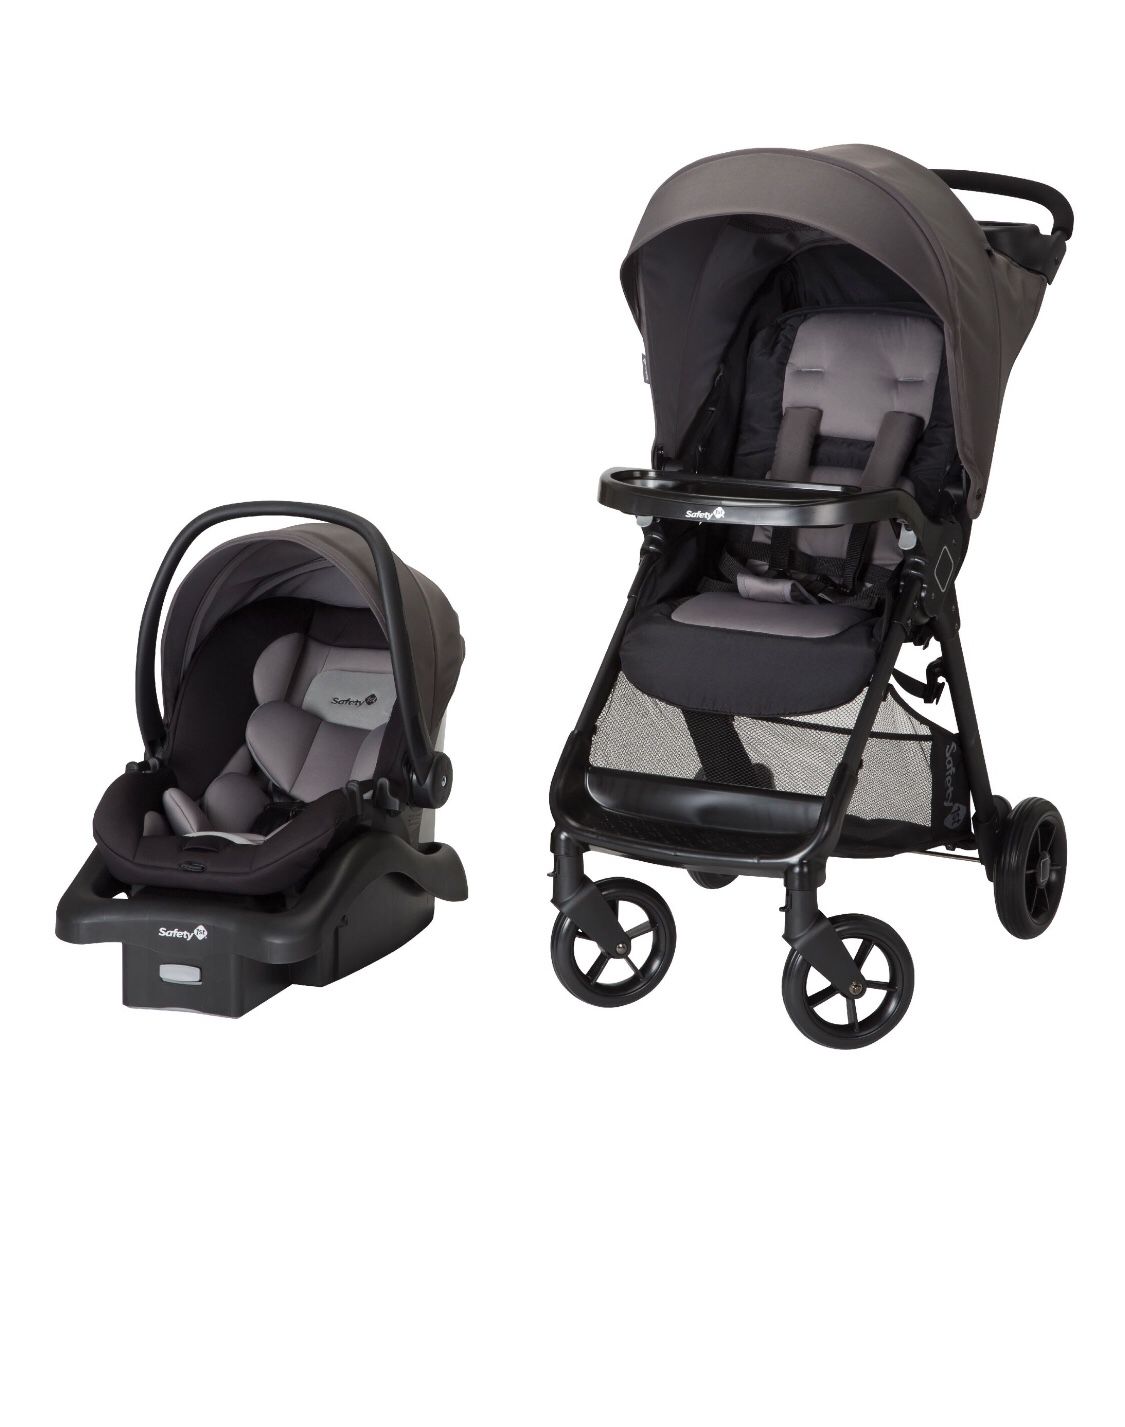 Safety 1st Smooth Ride Travel System with Infant Car Seat